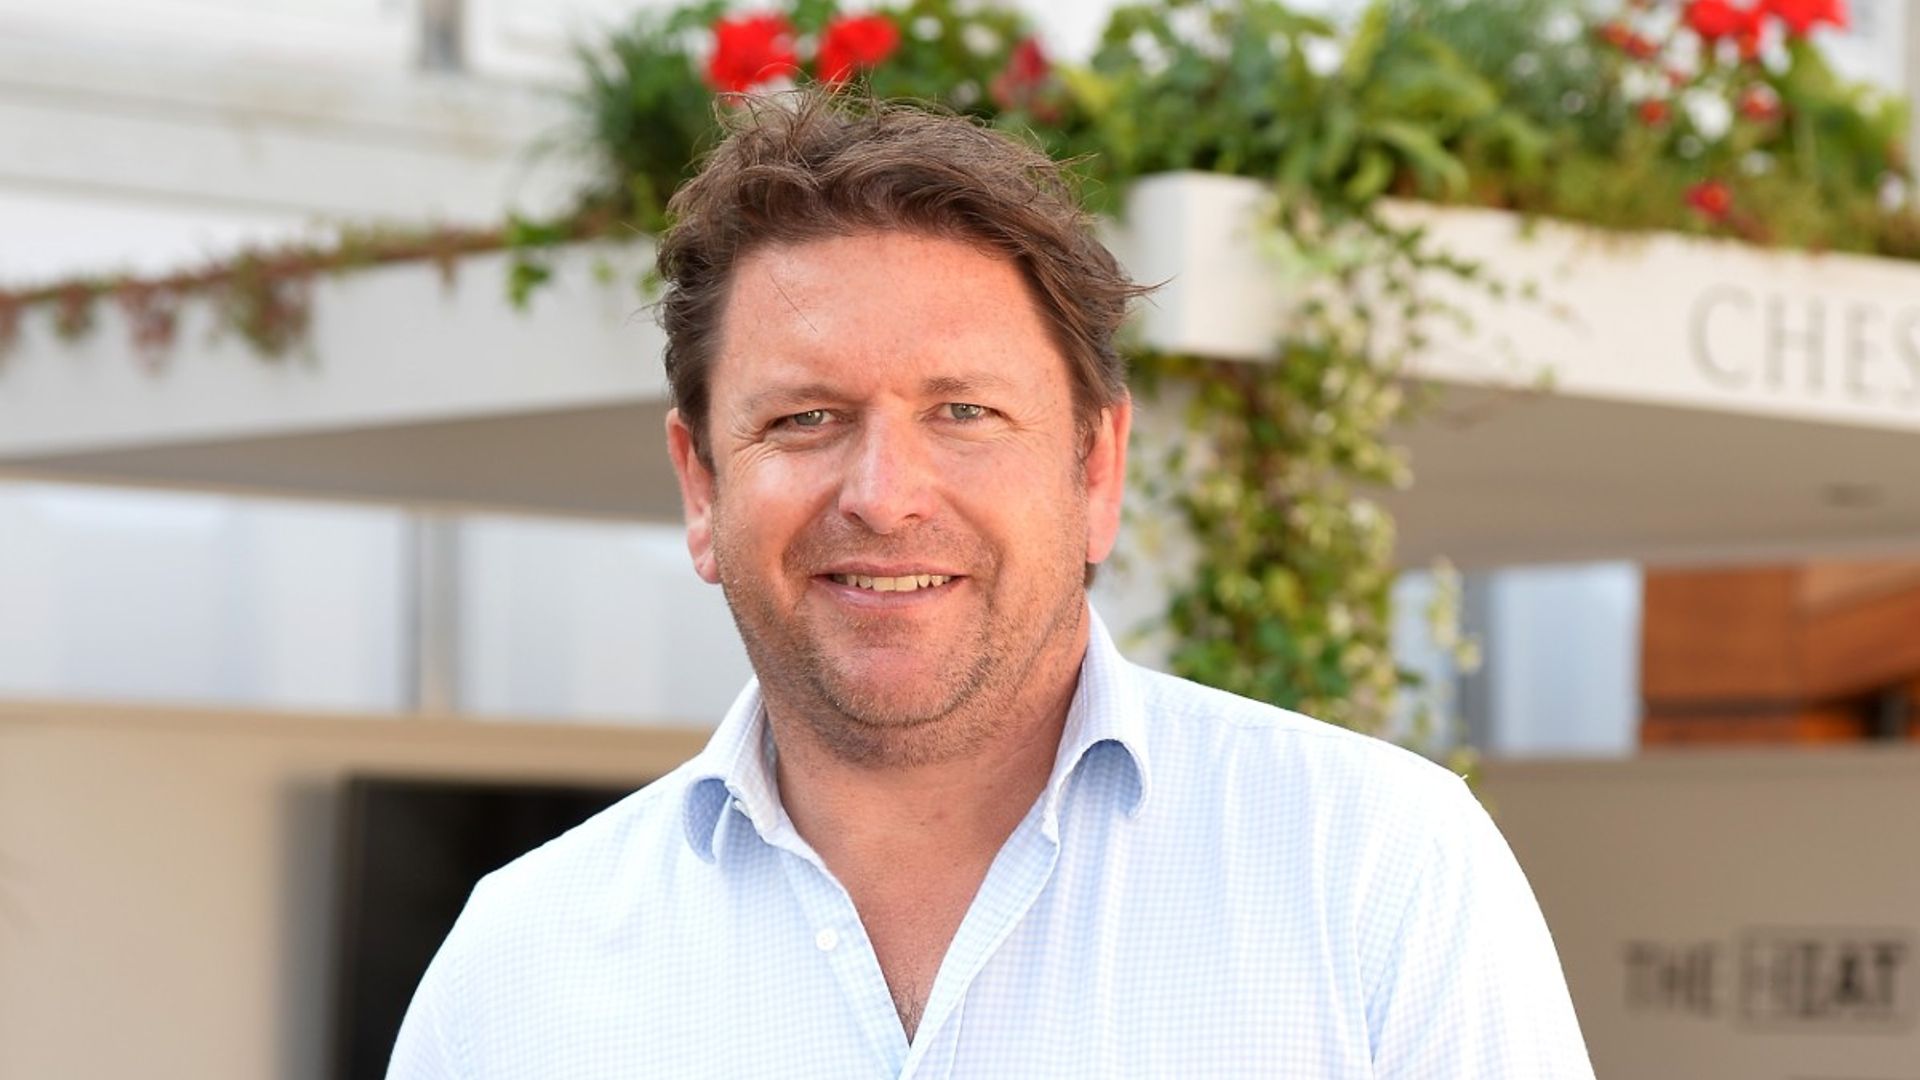 James Martin reveals condition that meant he nearly FAILED cookery school – find out more